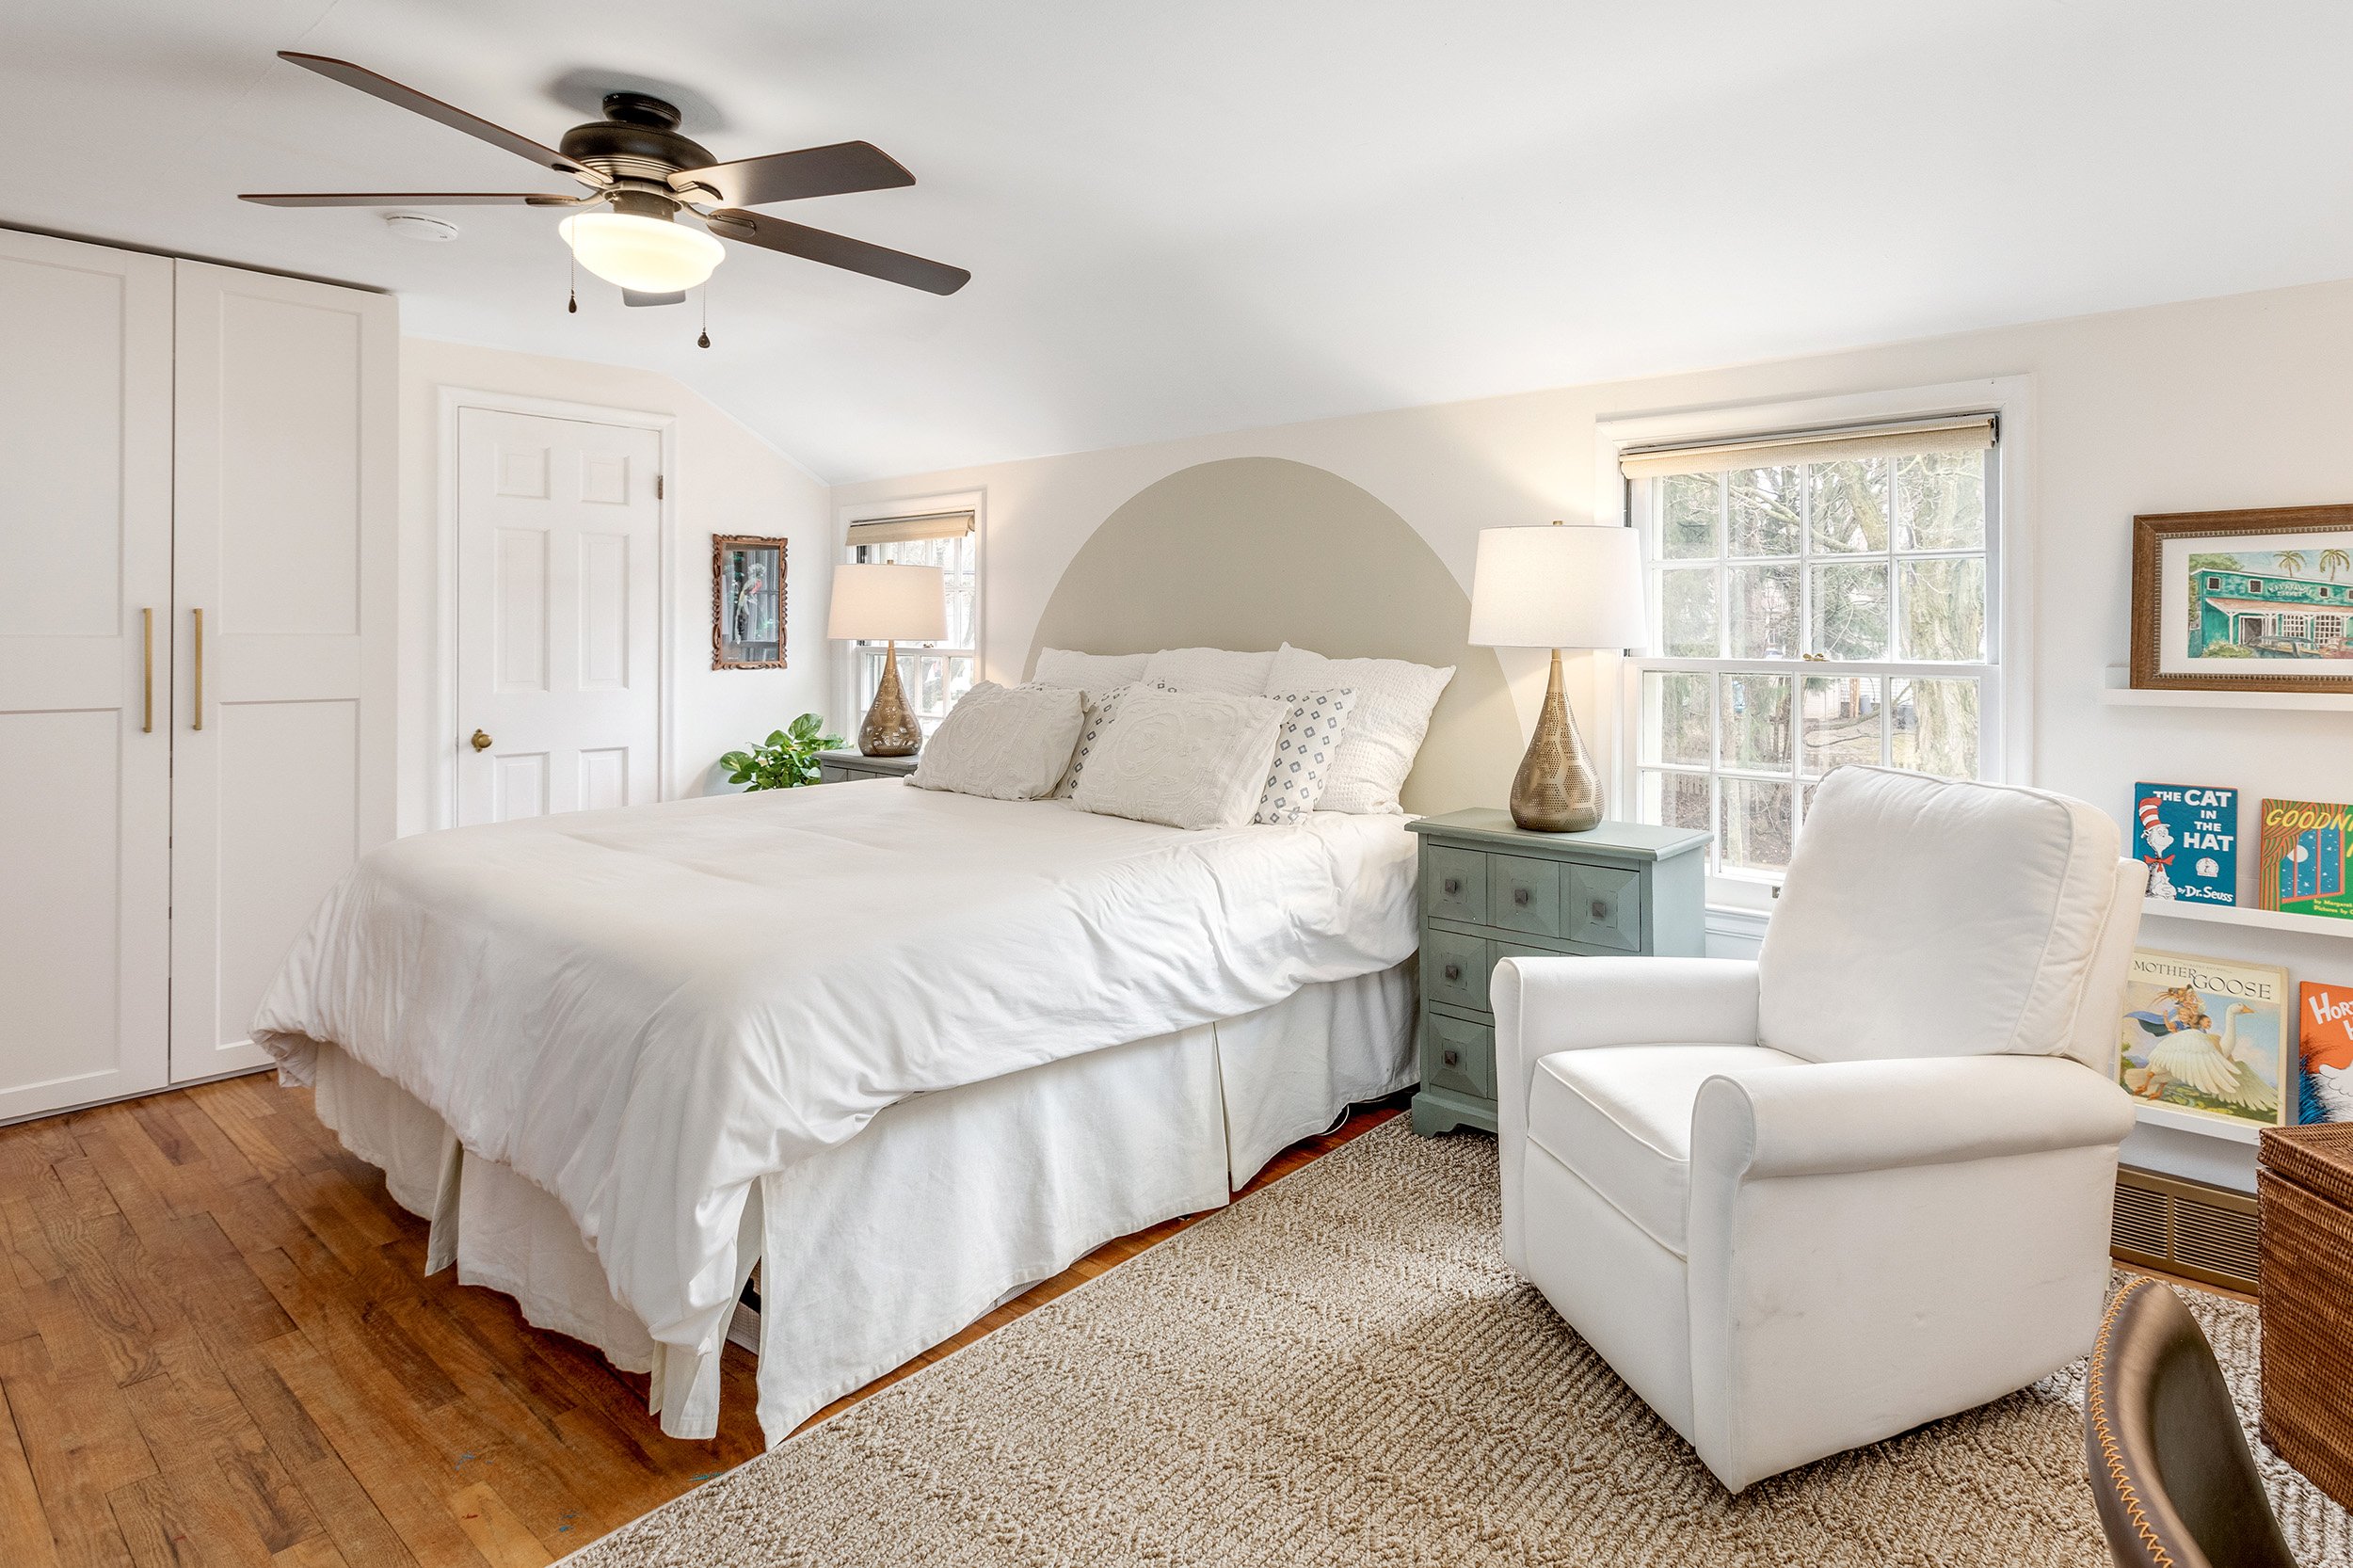  Ann Arbor Real Estate Photography - bedroom 